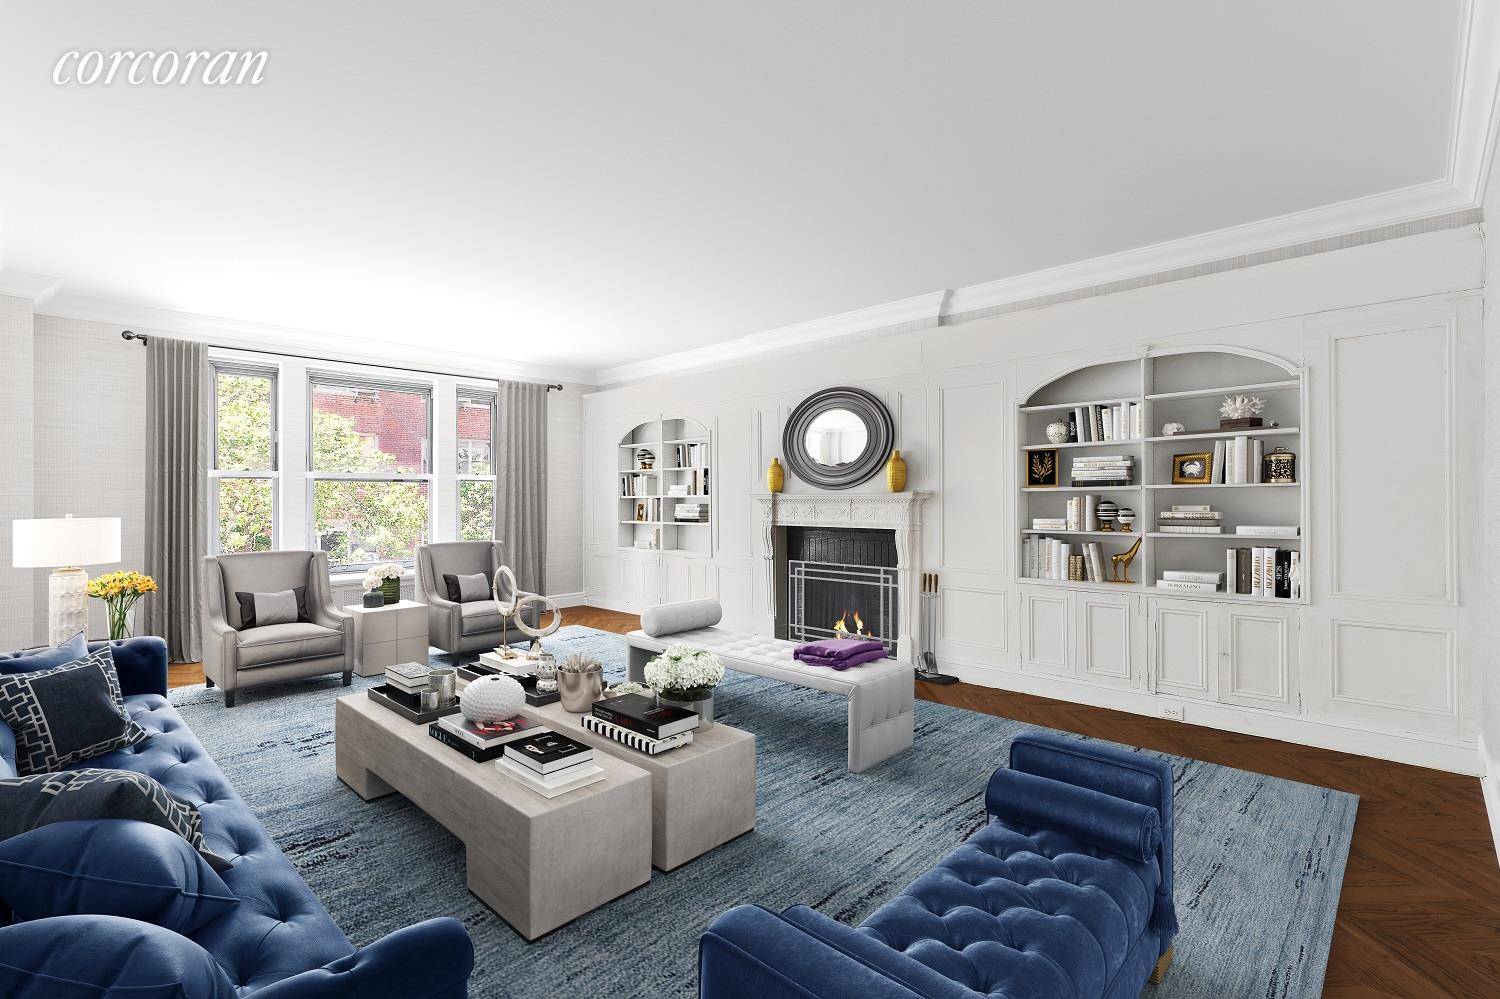 Virtually Staged Photography Residence 2AC at 1160 Park Avenue Rare Combination Opportunity Five Bedrooms Four Baths 4, 675sqft Rare opportunity to combine two classic Park Avenue residences into one expansive ...